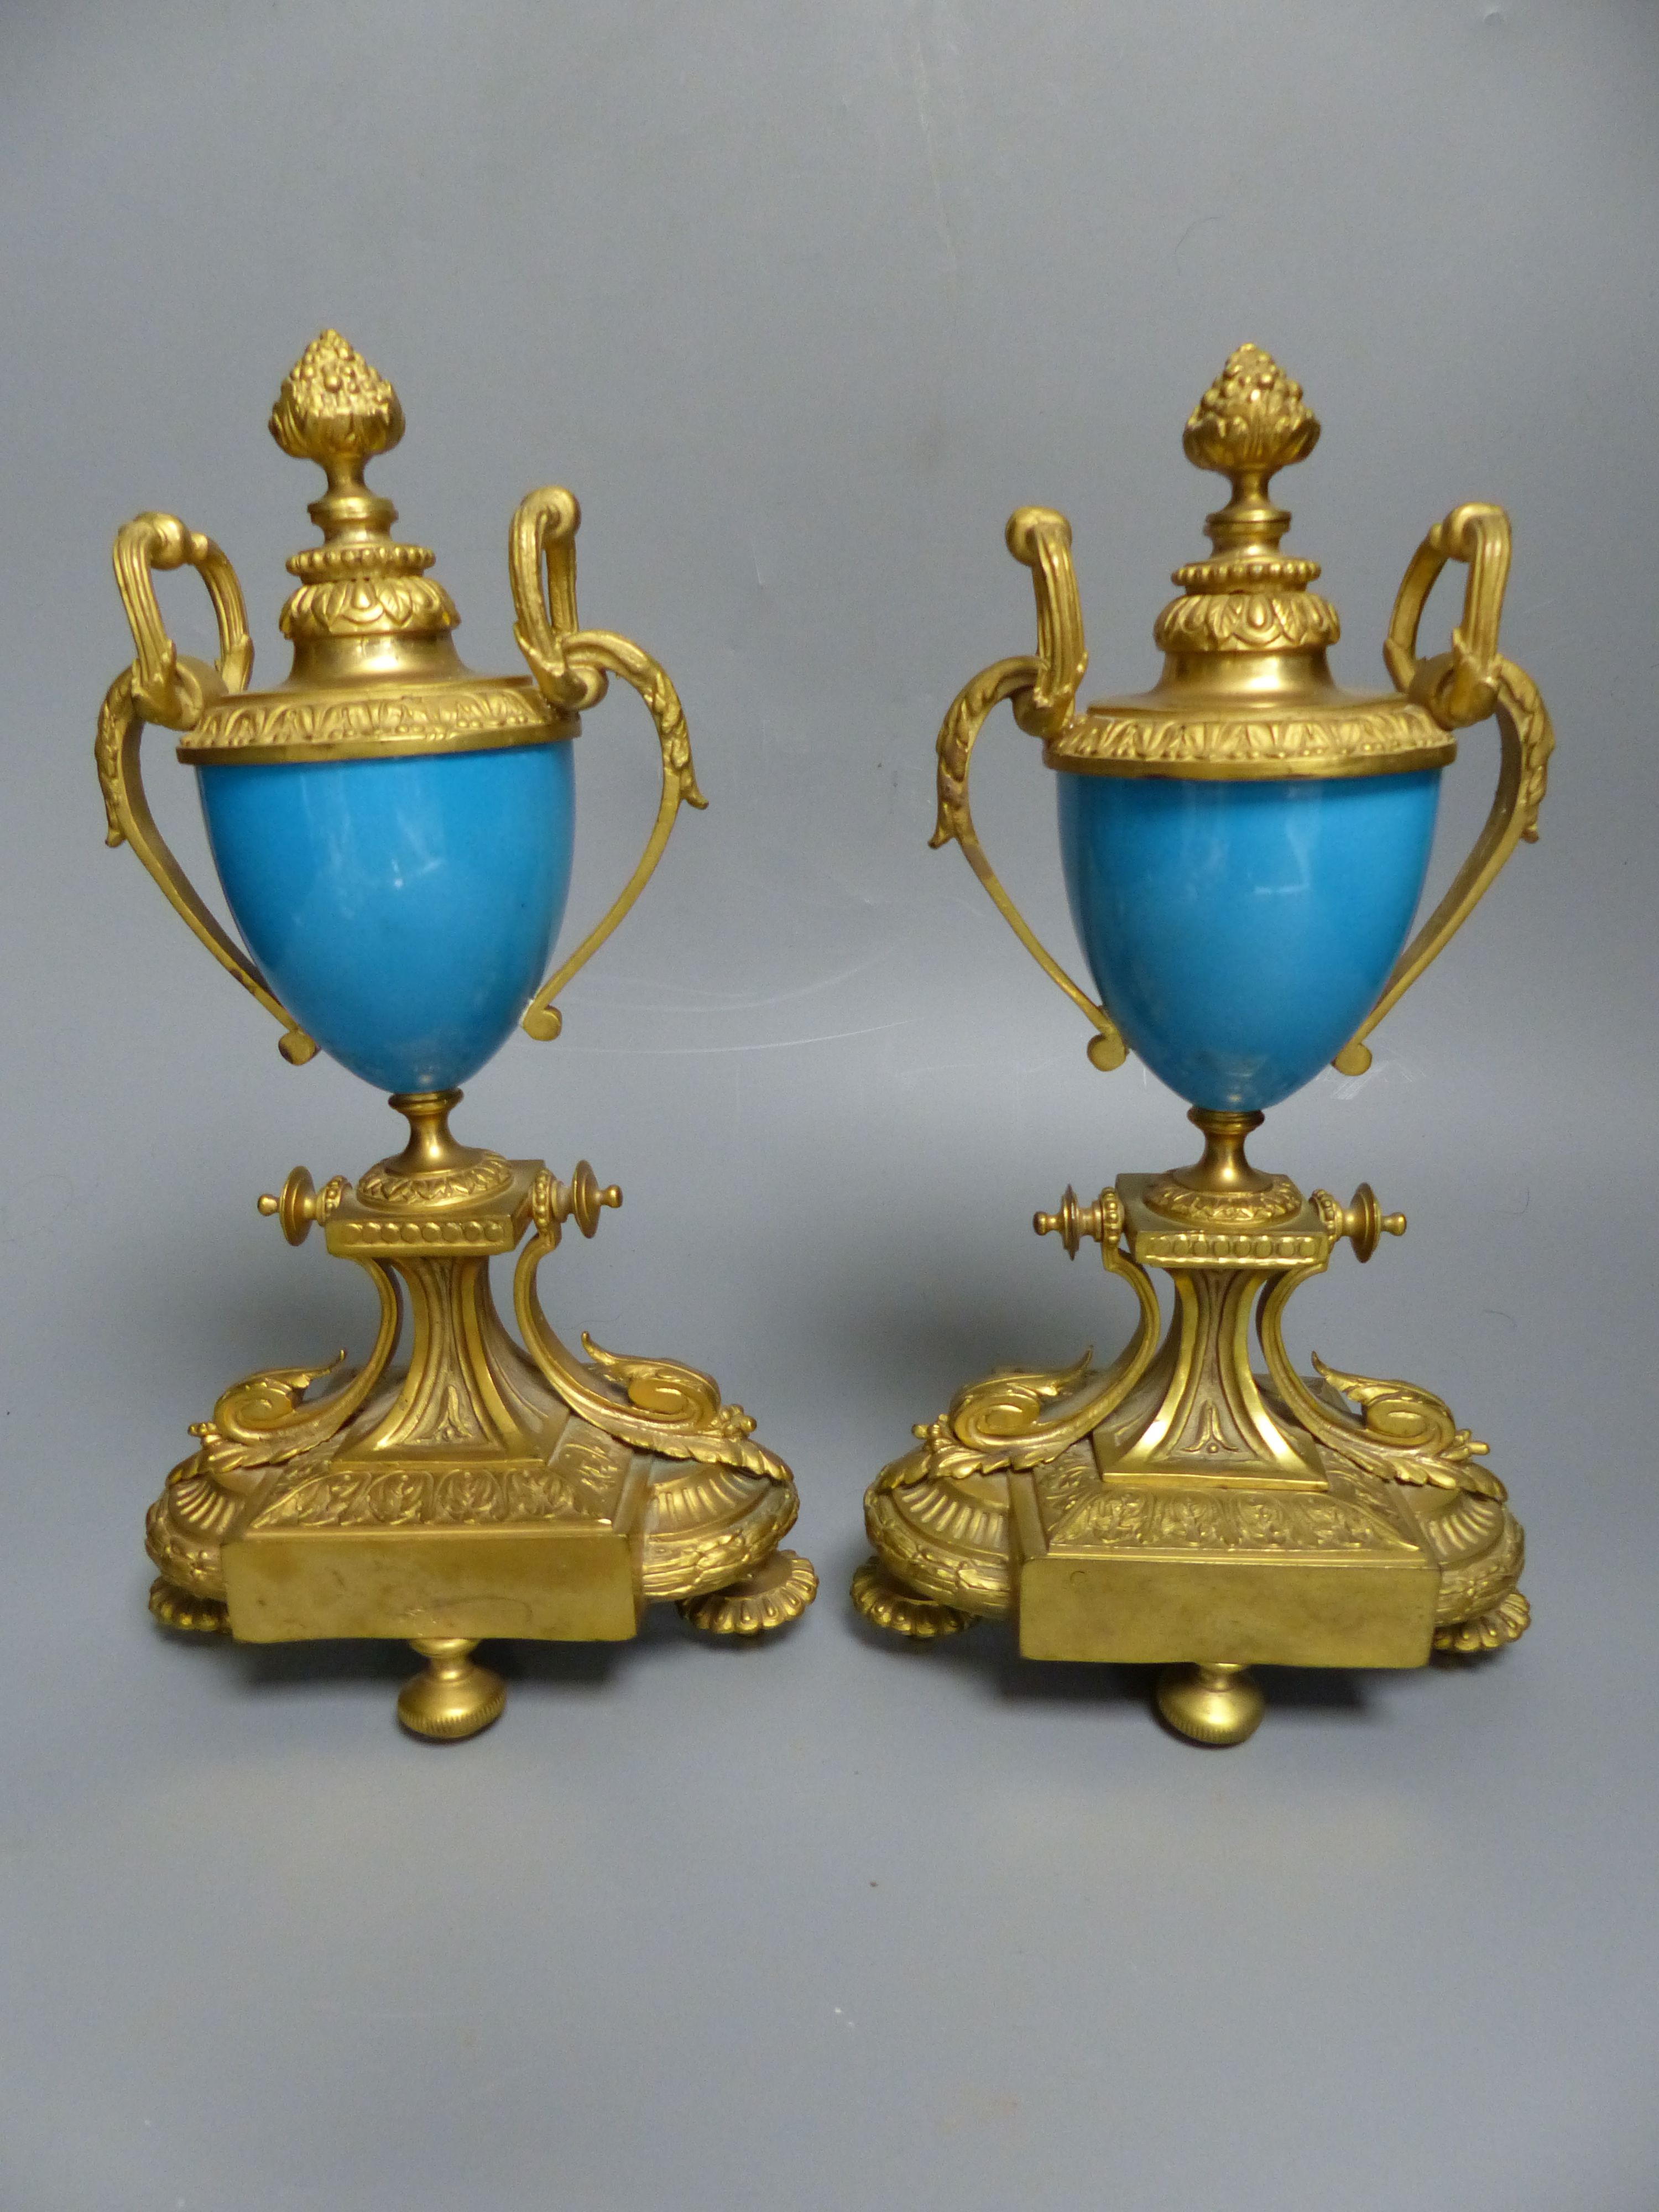 A pair of 19th century French ormolu and Sevres style porcelain urns, decorated with flowers and landscapes, height 26.5cm